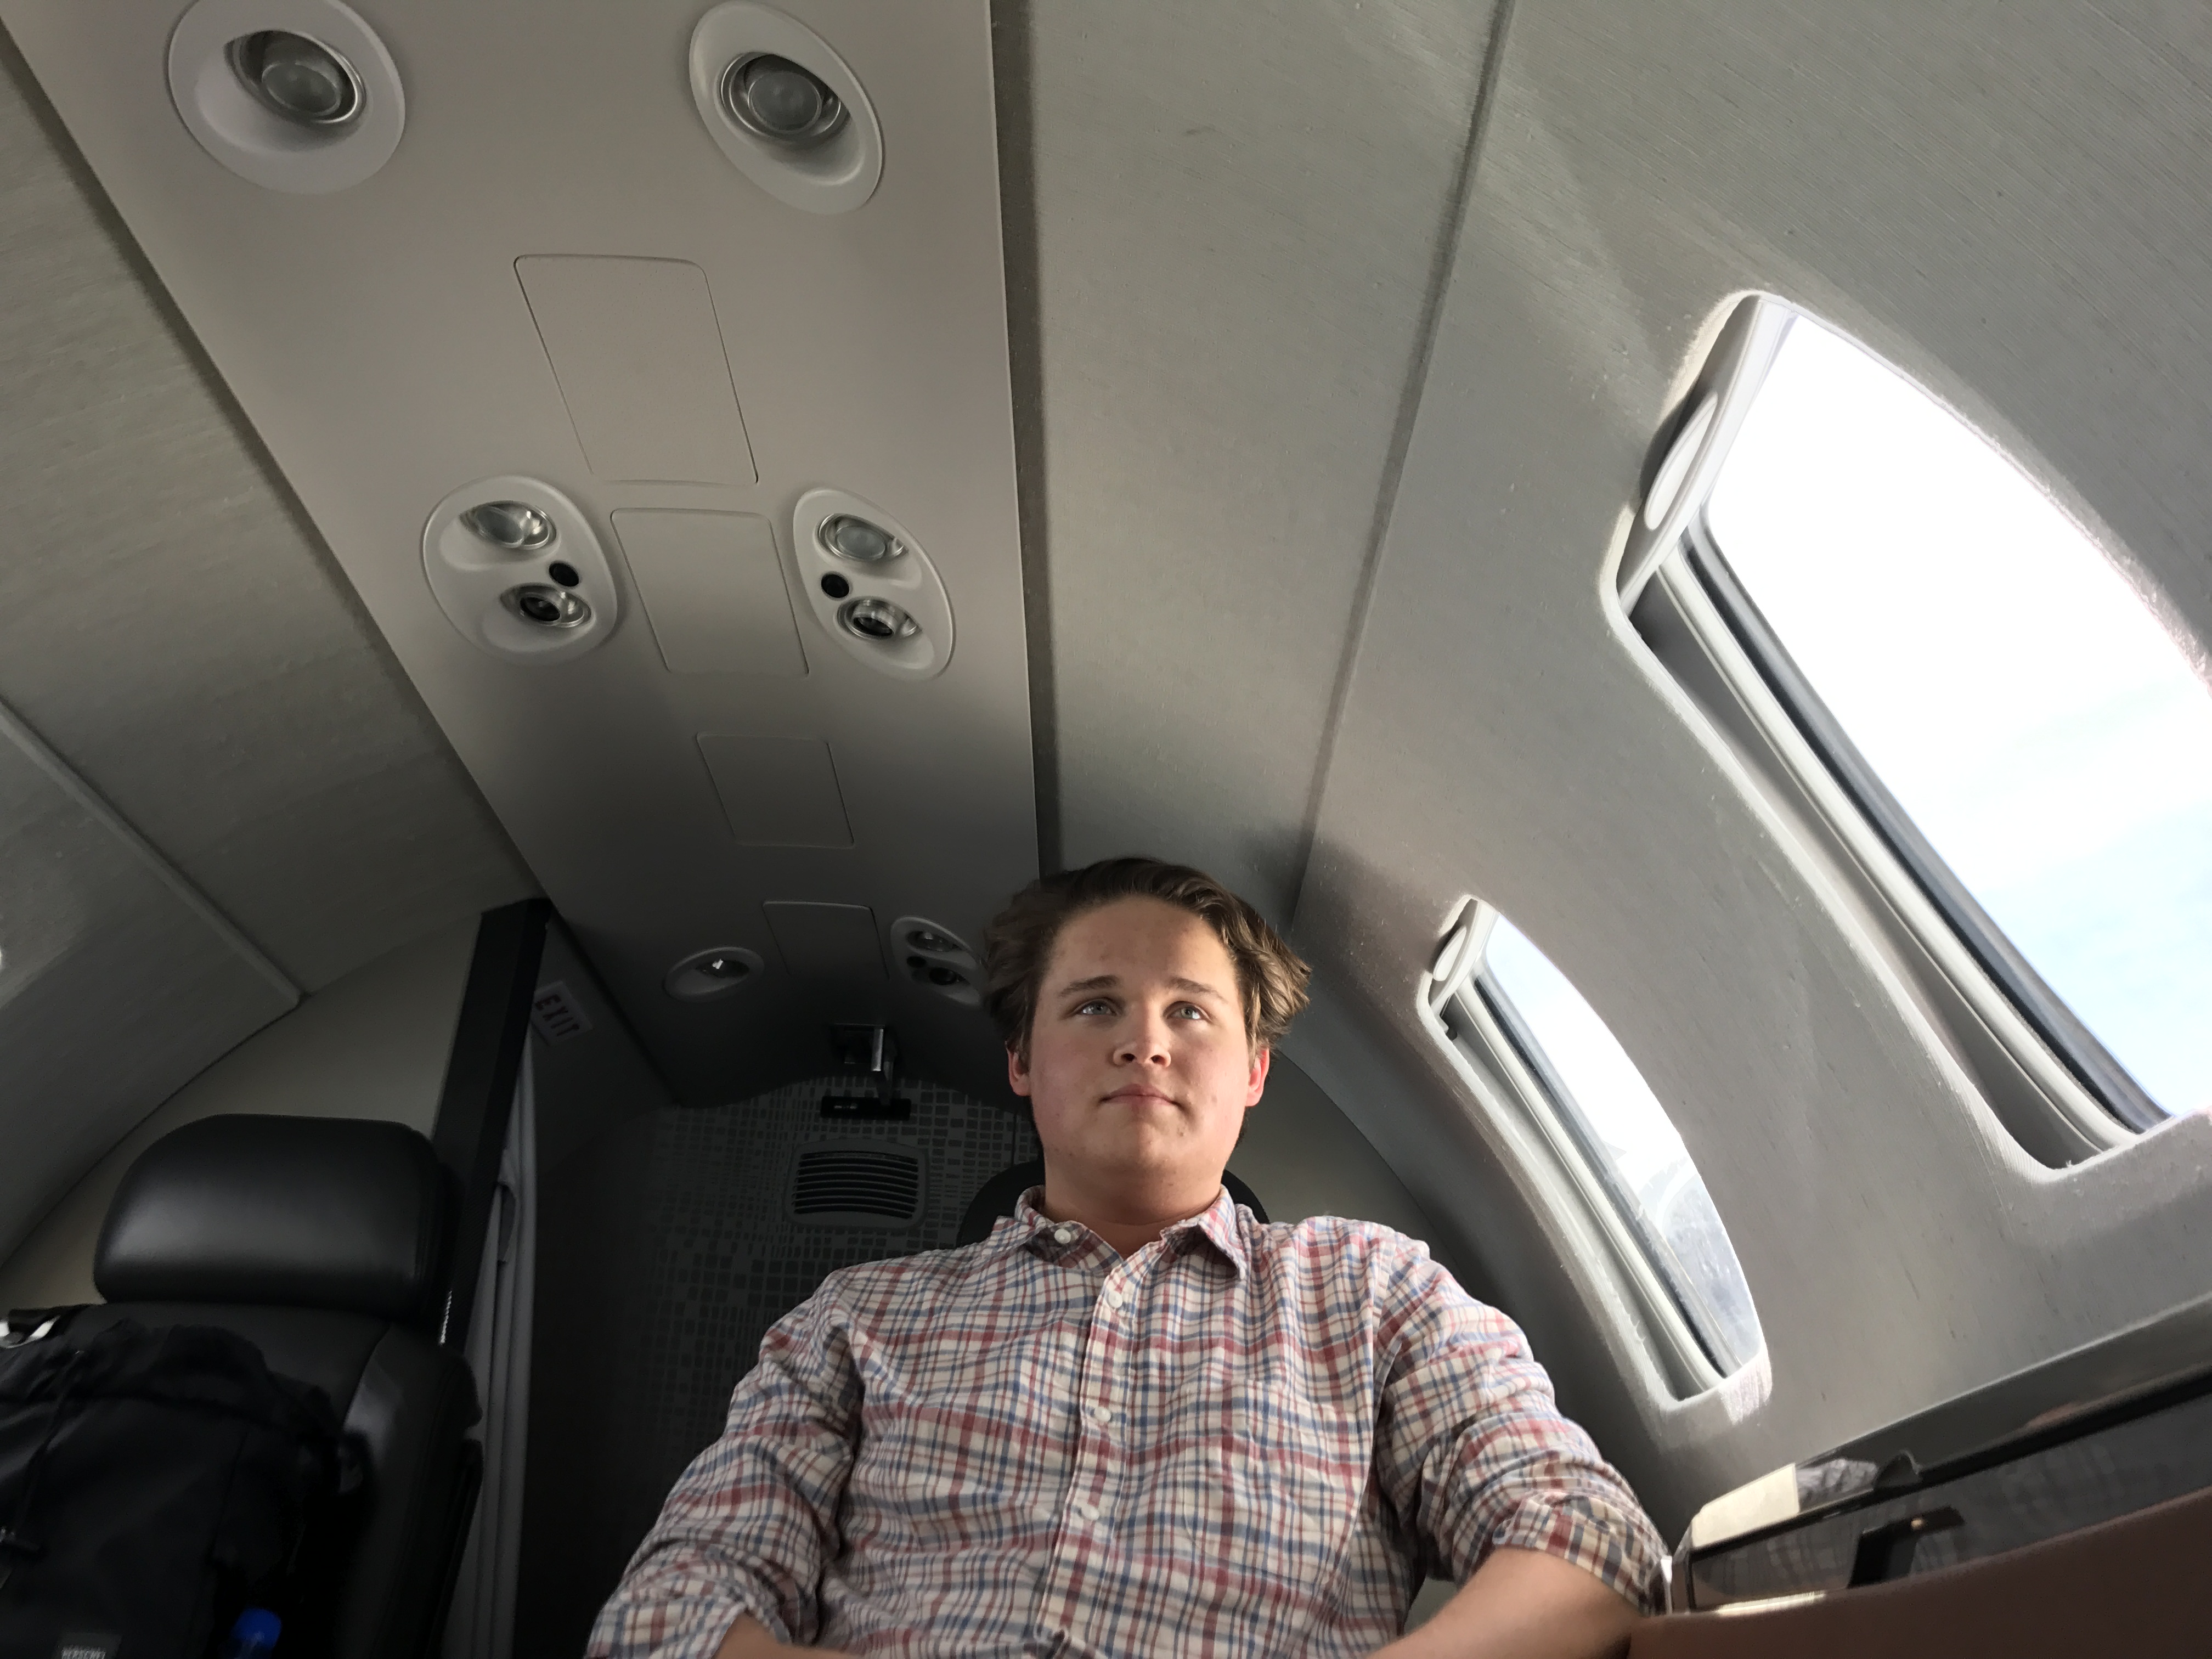 Private jet flights call for terrible selfies